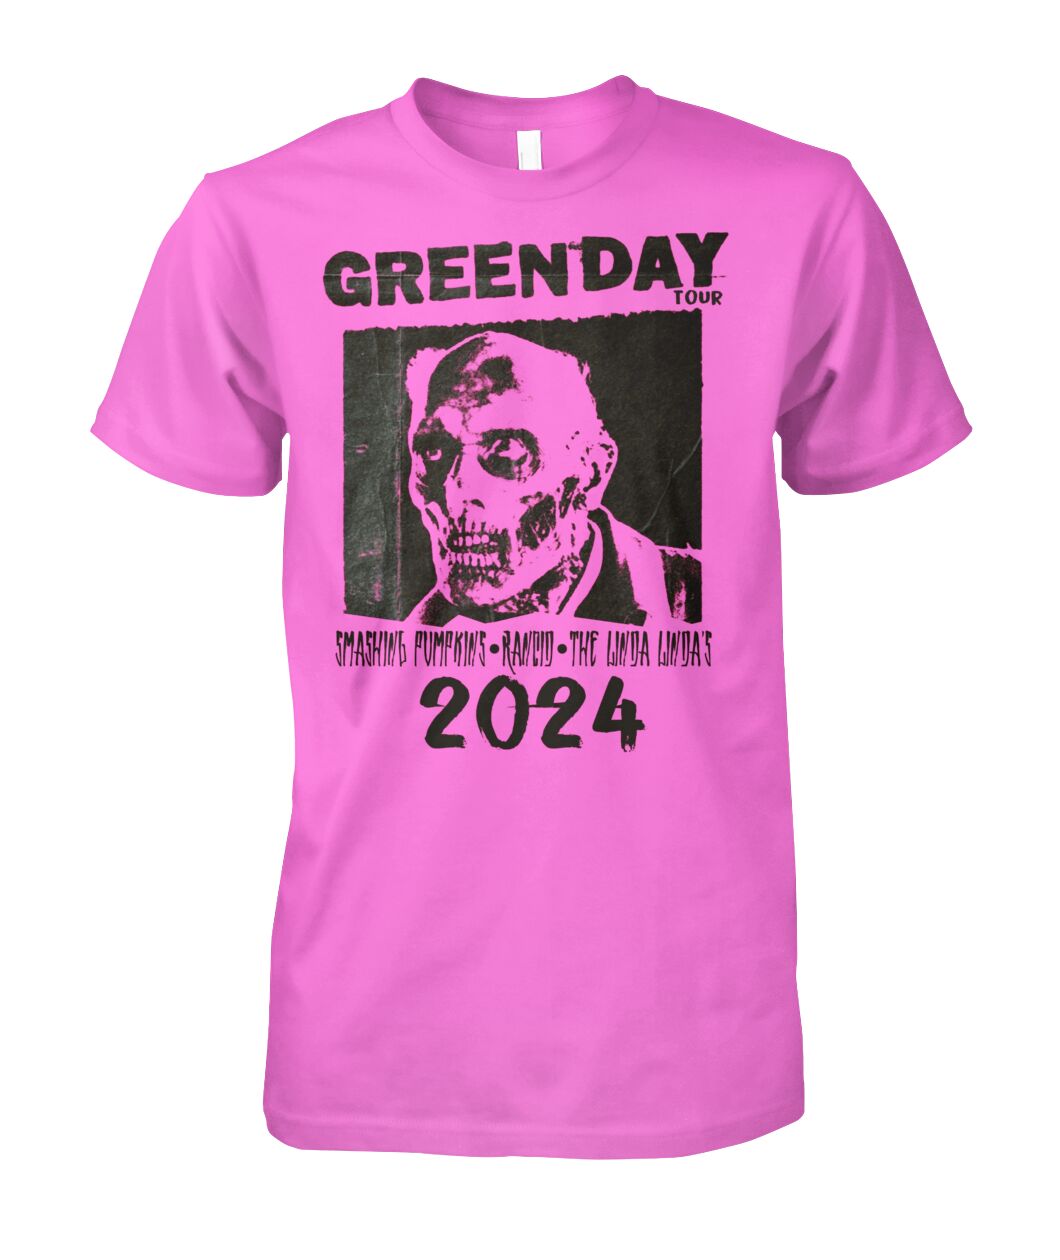 Green Day Concert 2024 Get Ready to Rock!